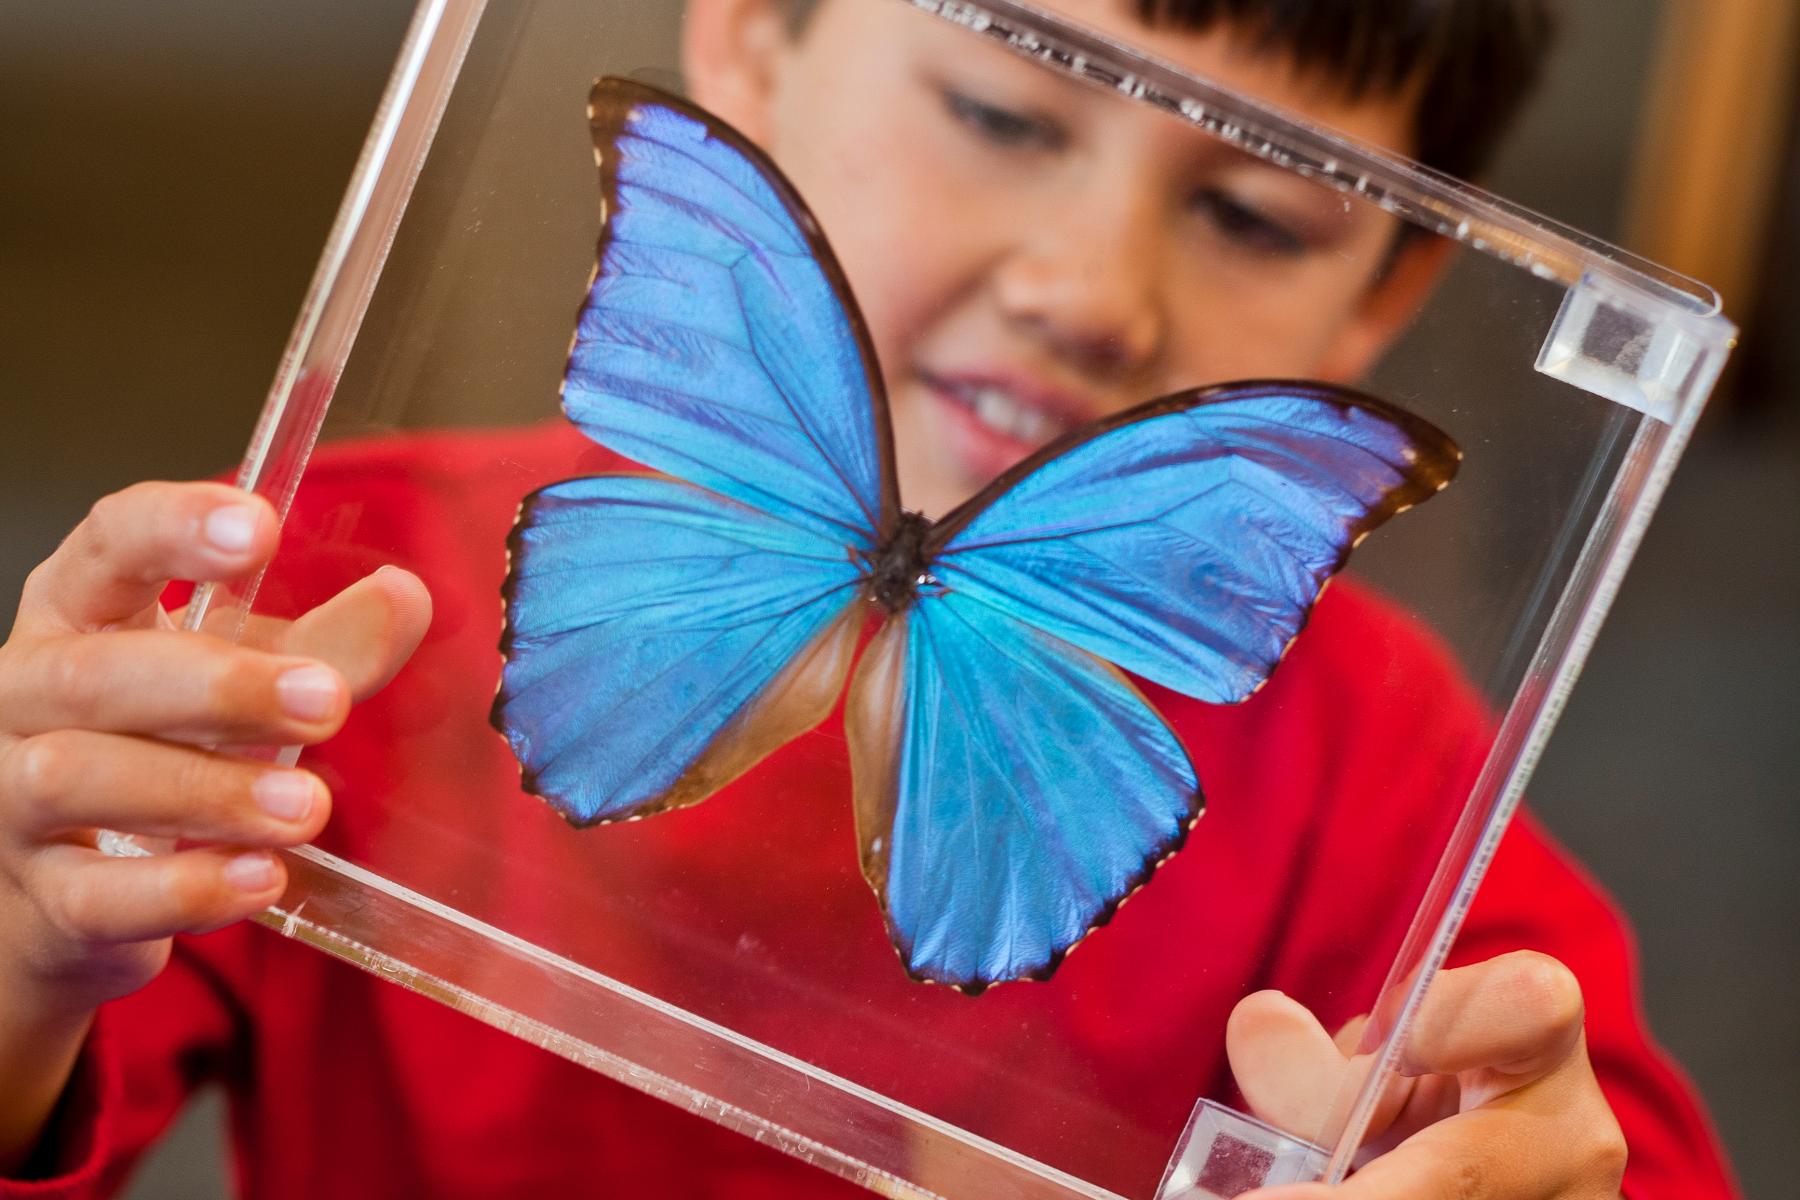 Child in a red shirt with a preserved butterfly